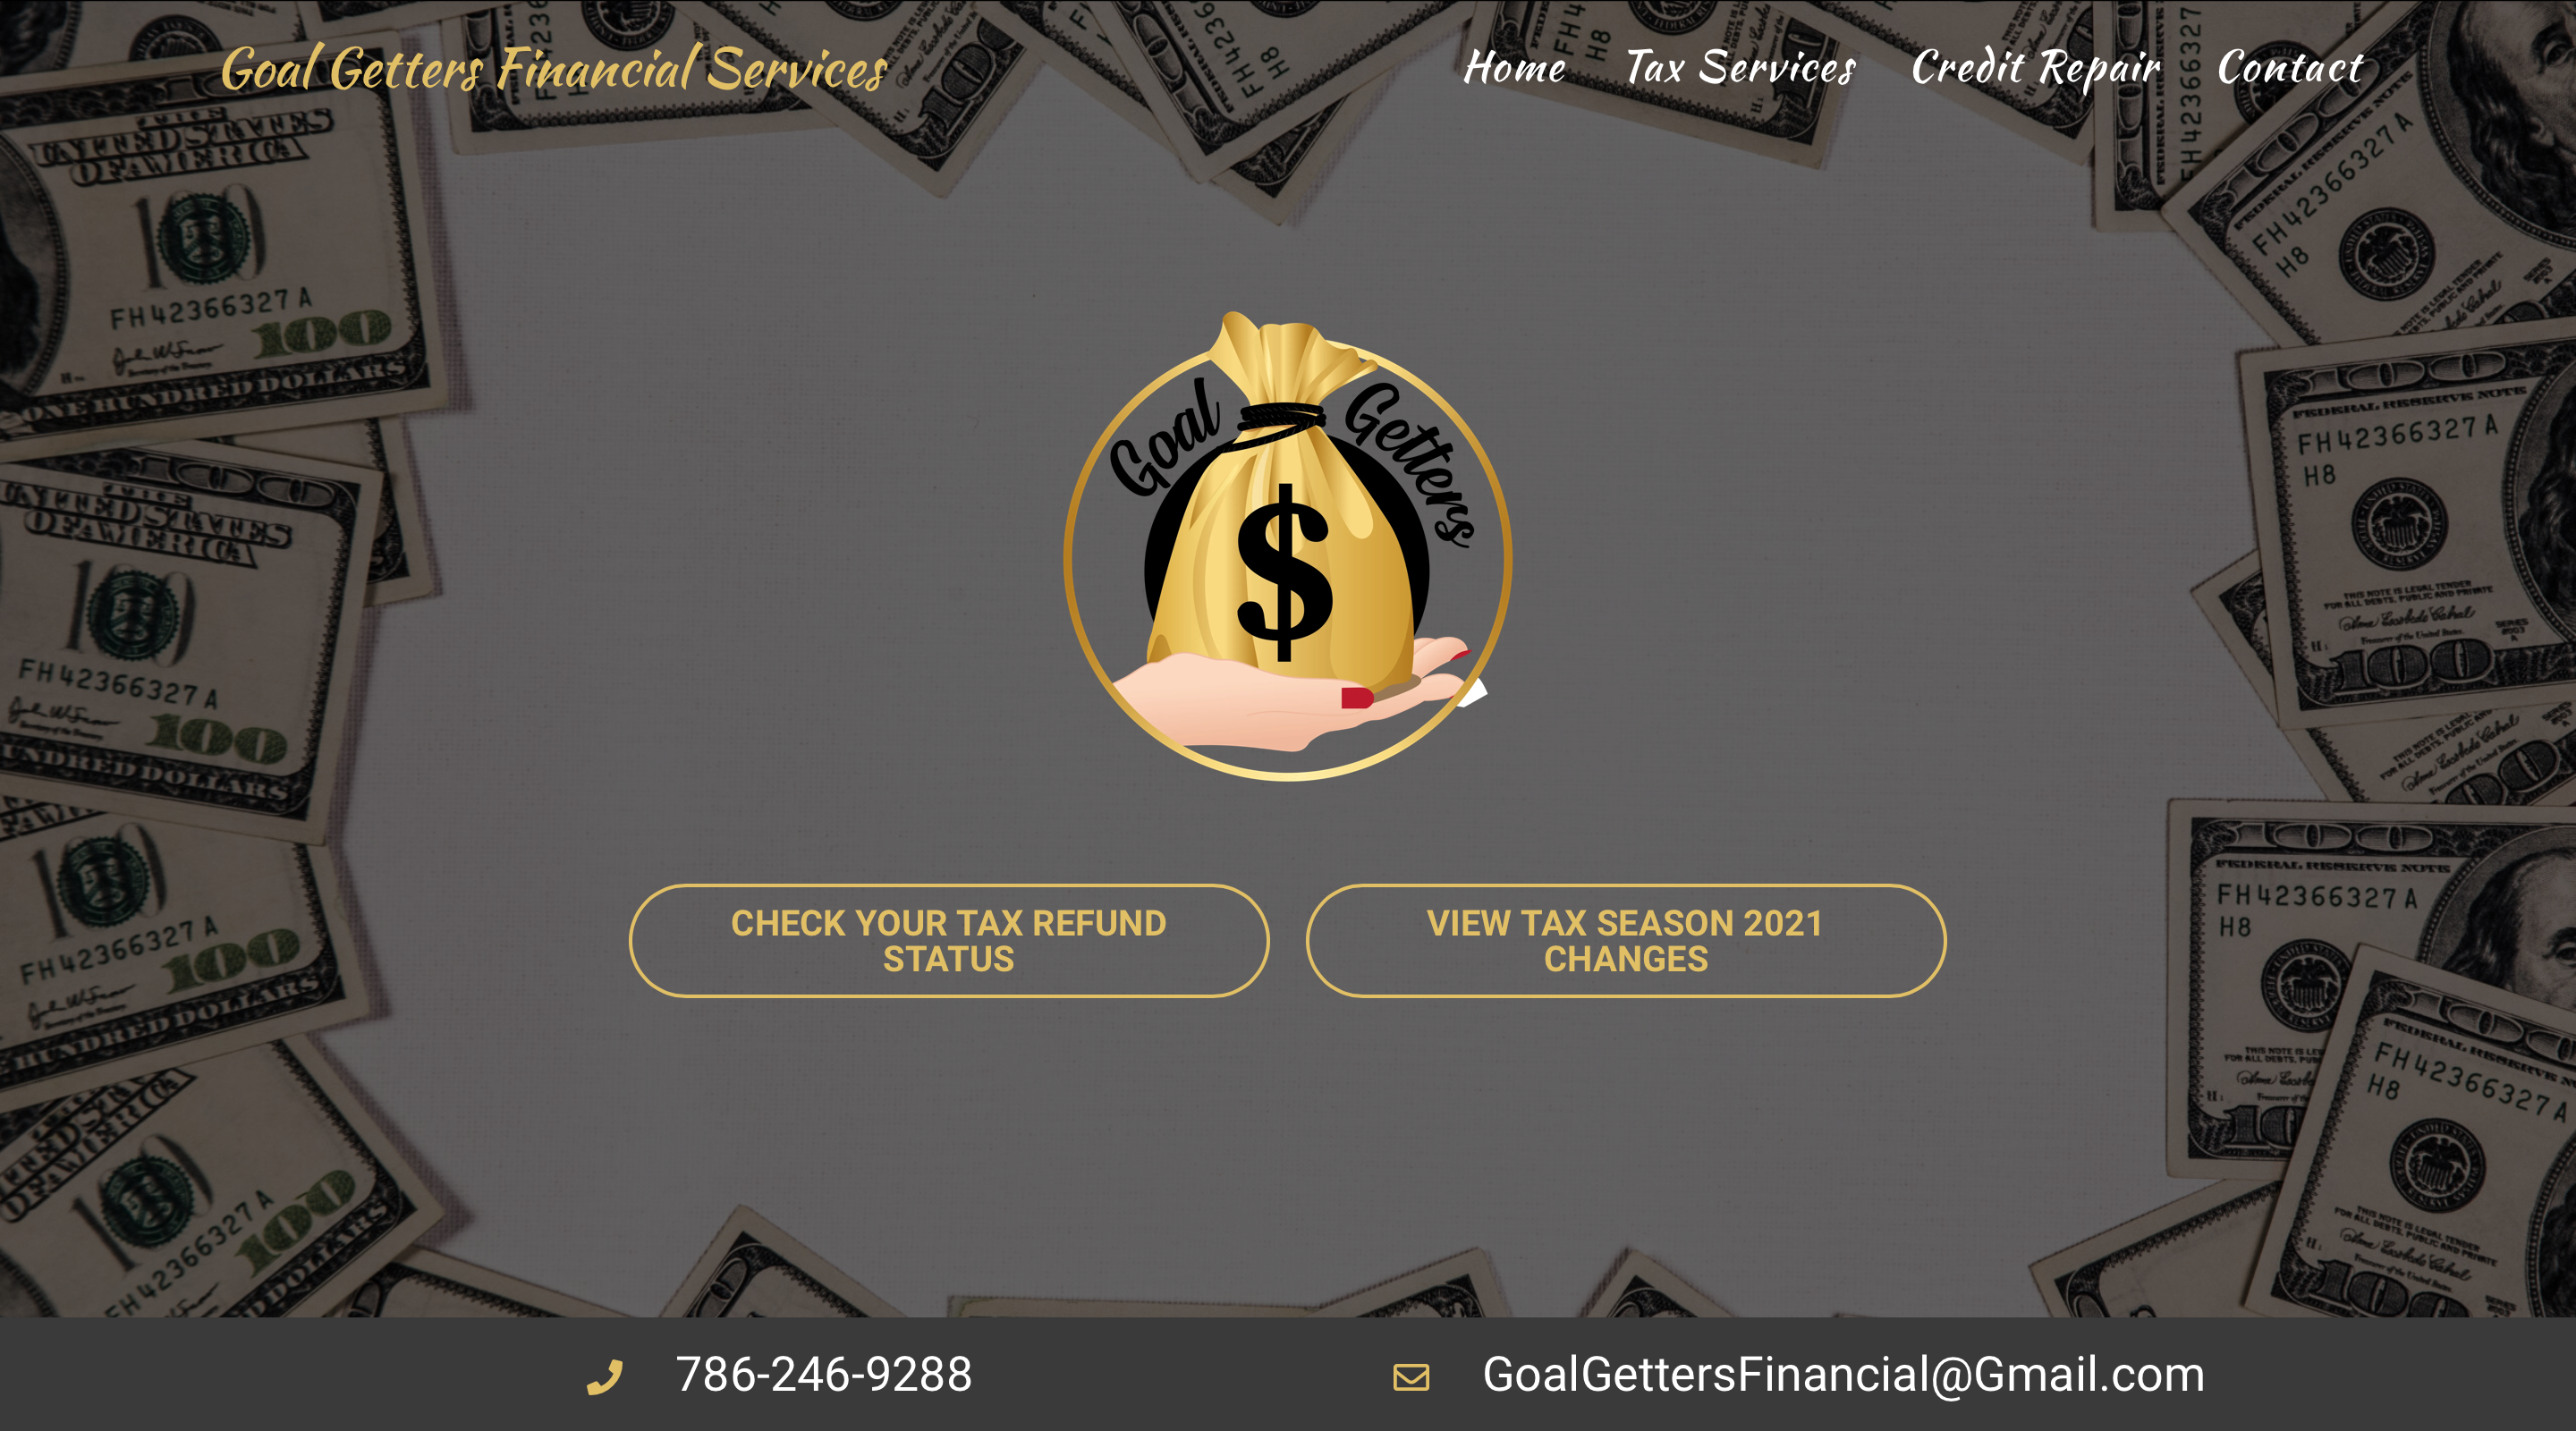 Goal Getters Financial Services Website